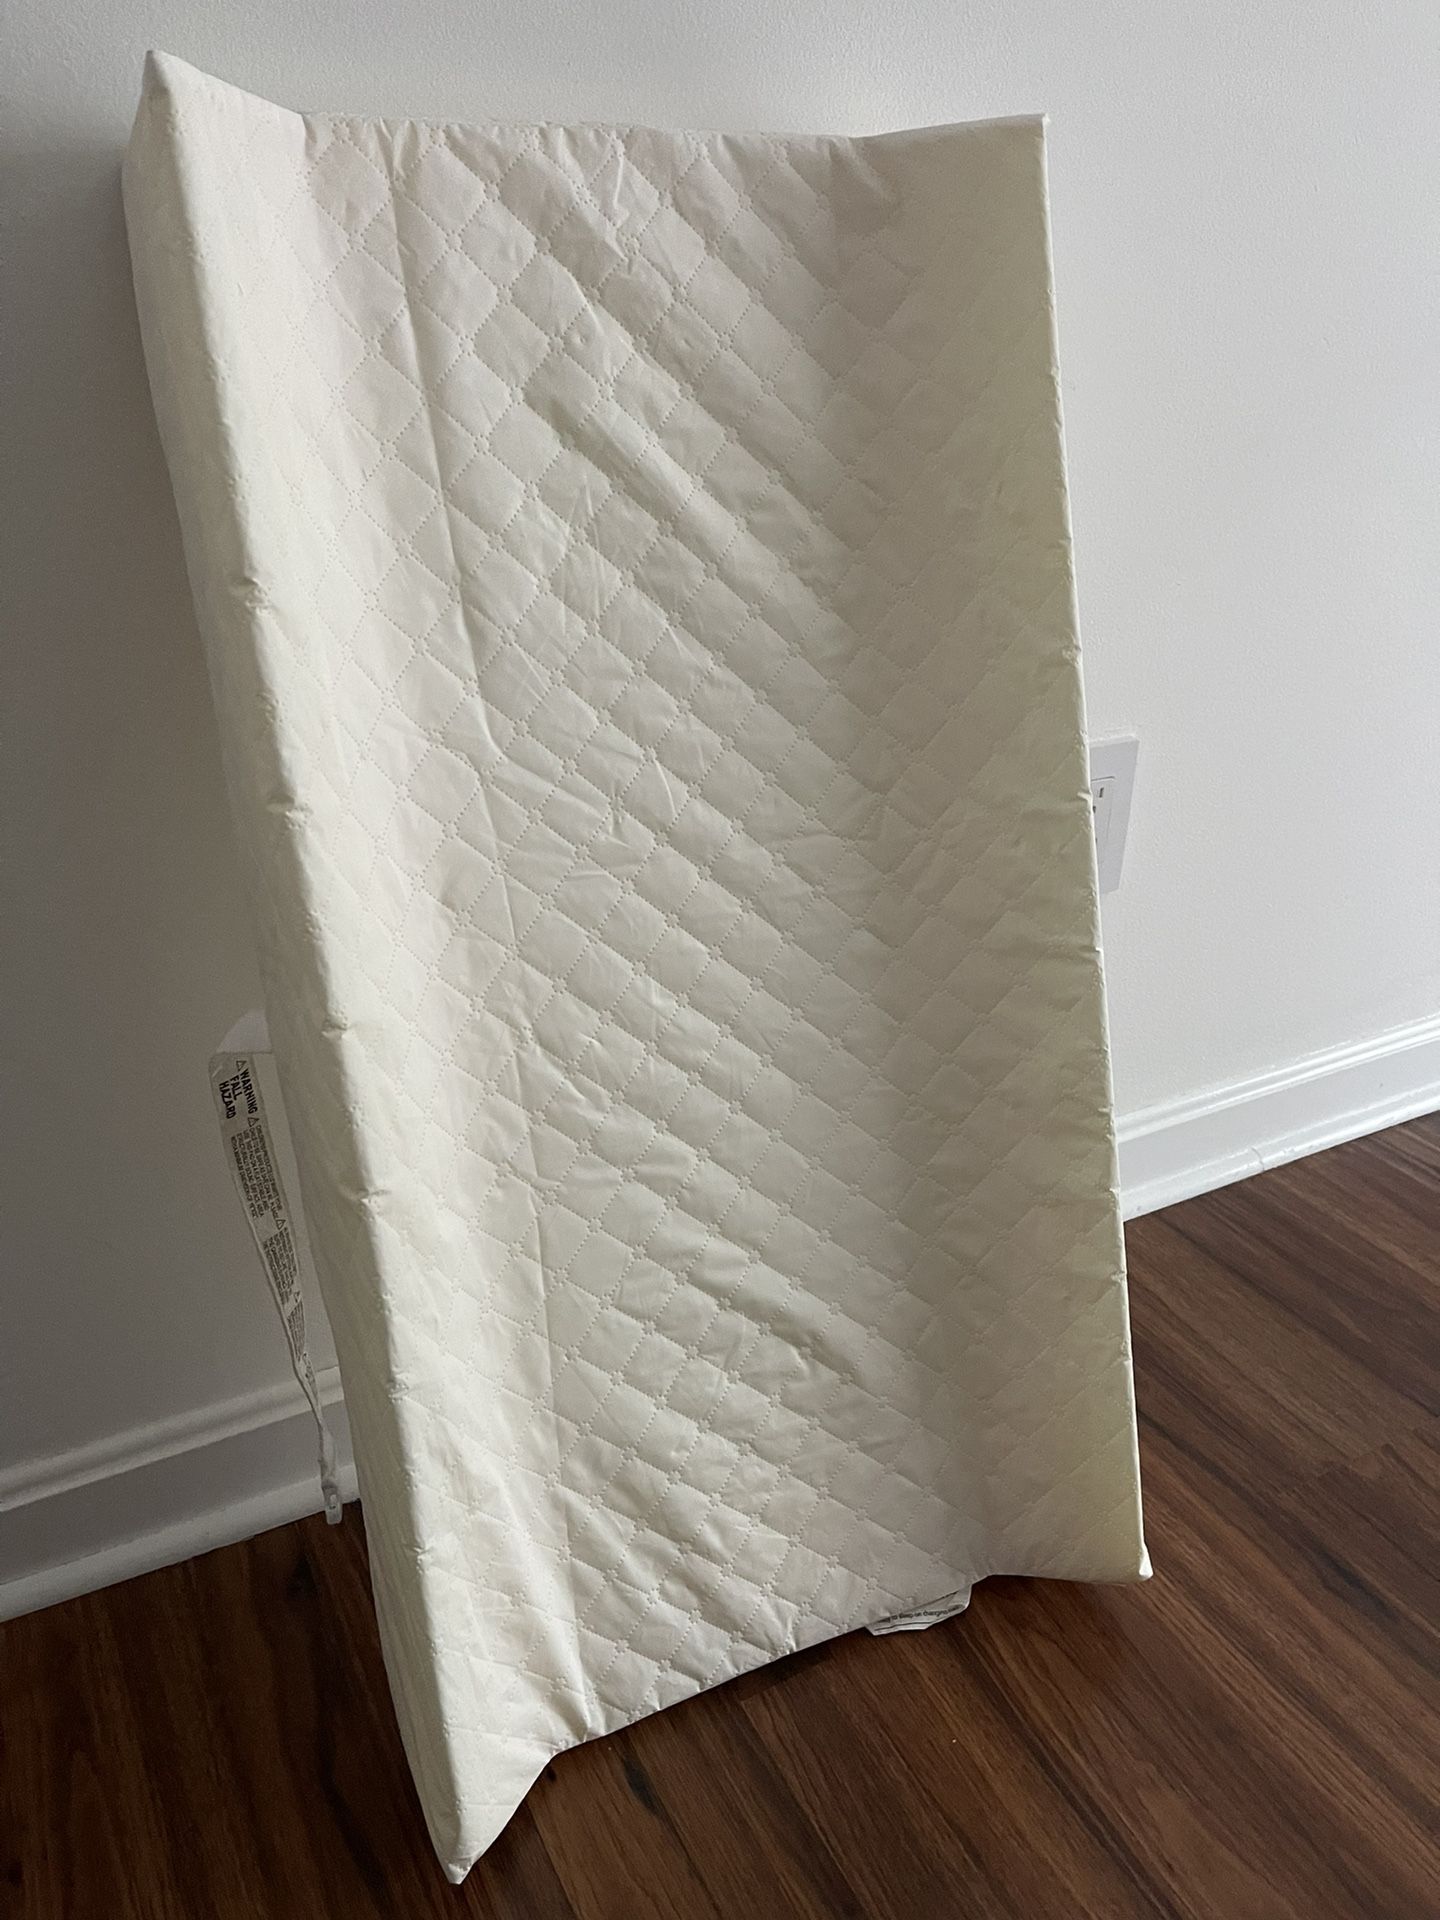 Mattress for changing diapers